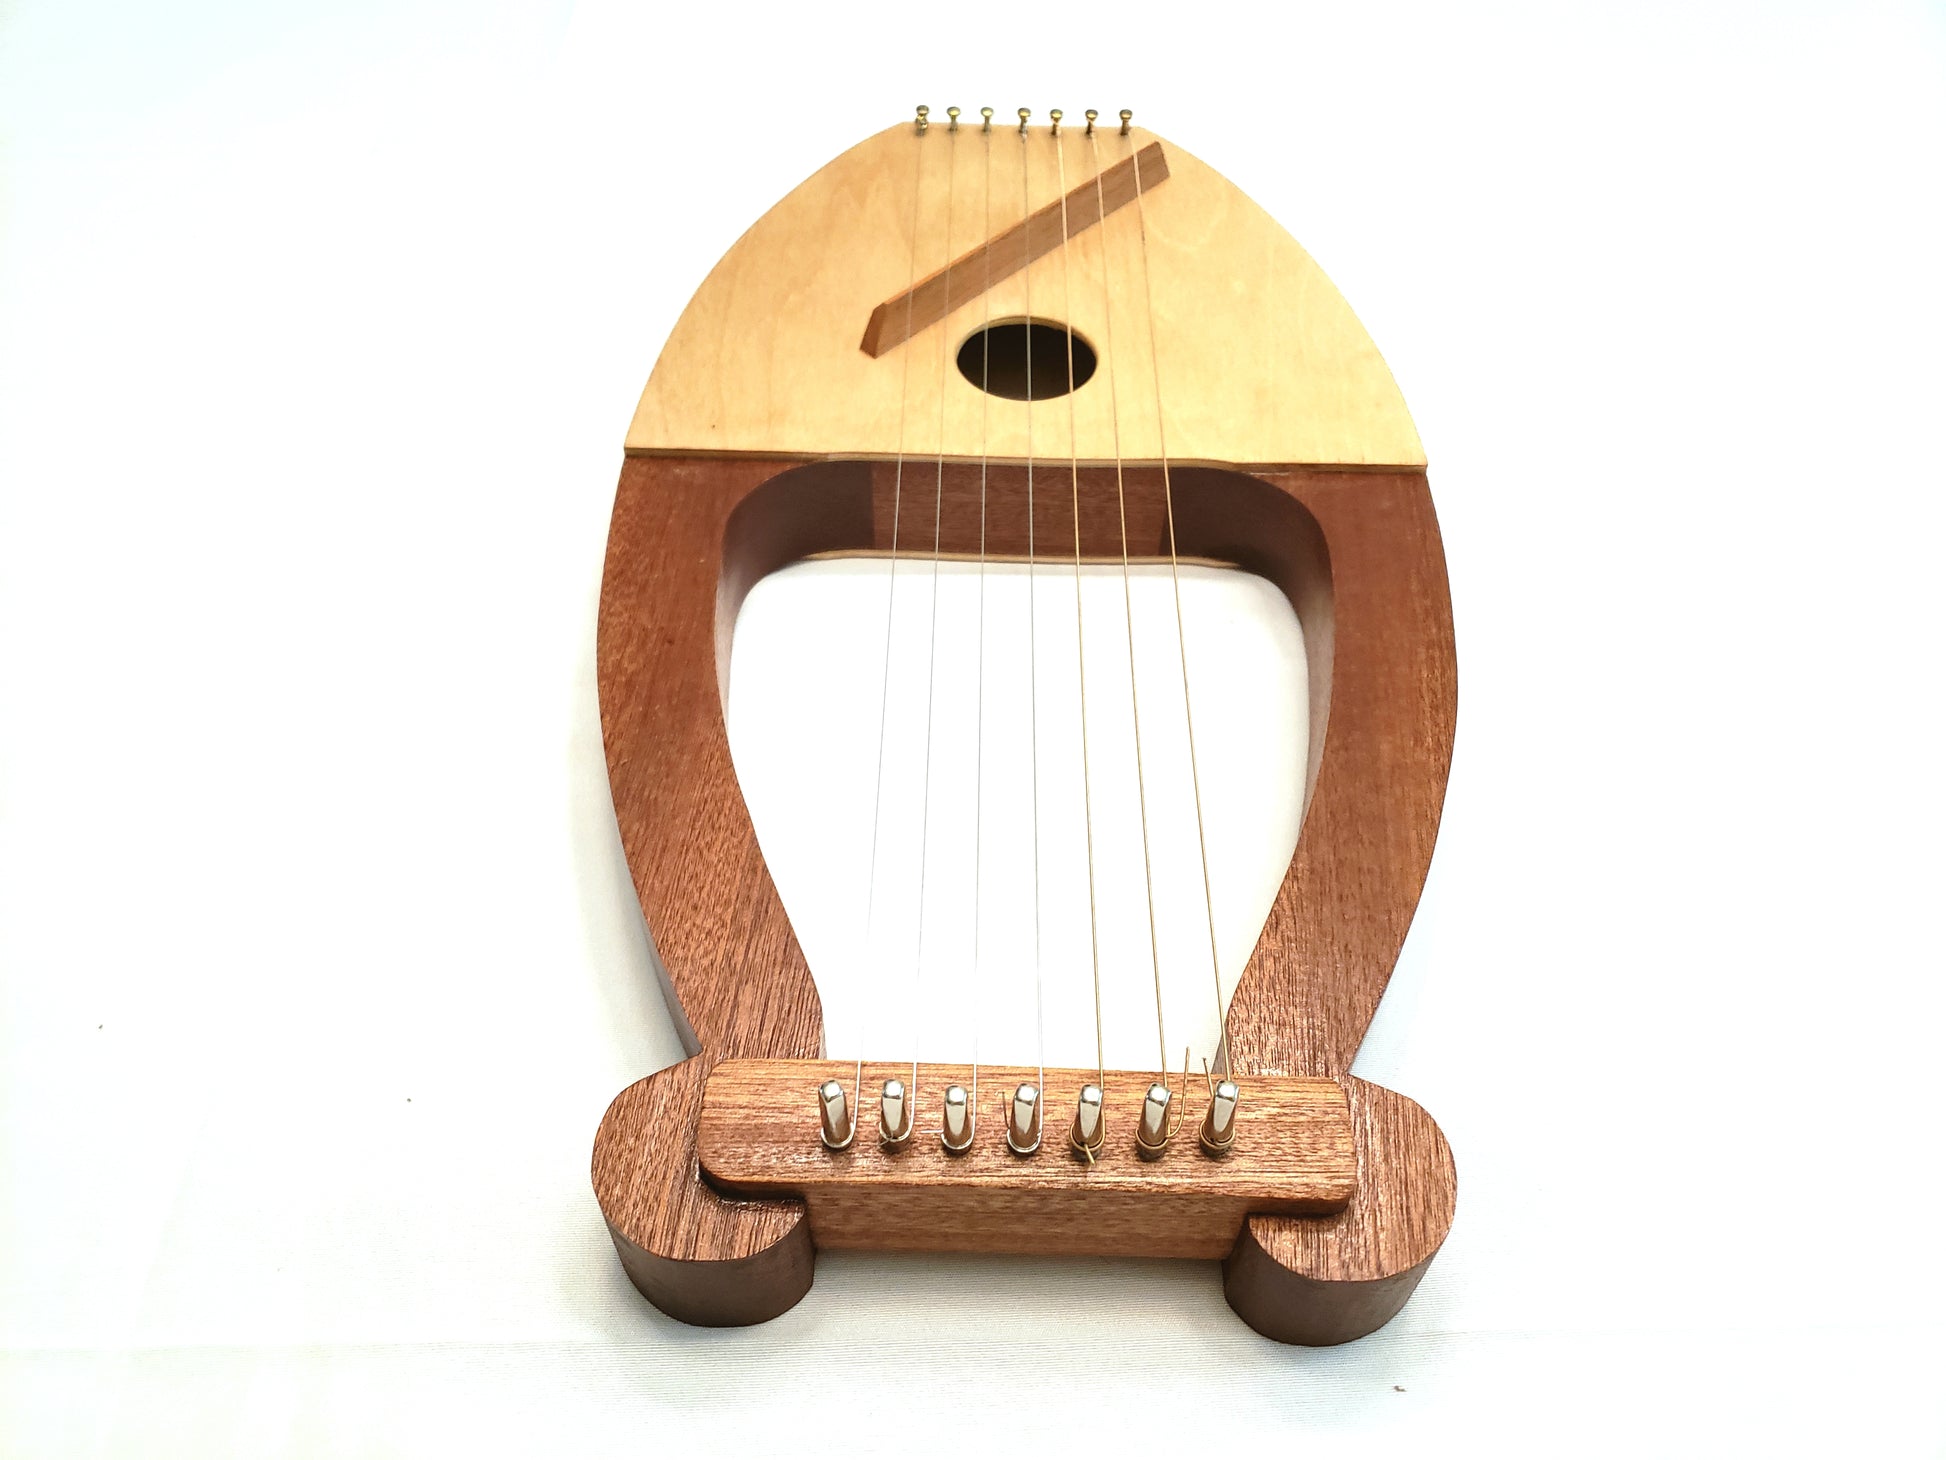 Luvay Lyre Harp, 7 Metal String - Orchestral Strings Instrument, with  Tuning Wrench